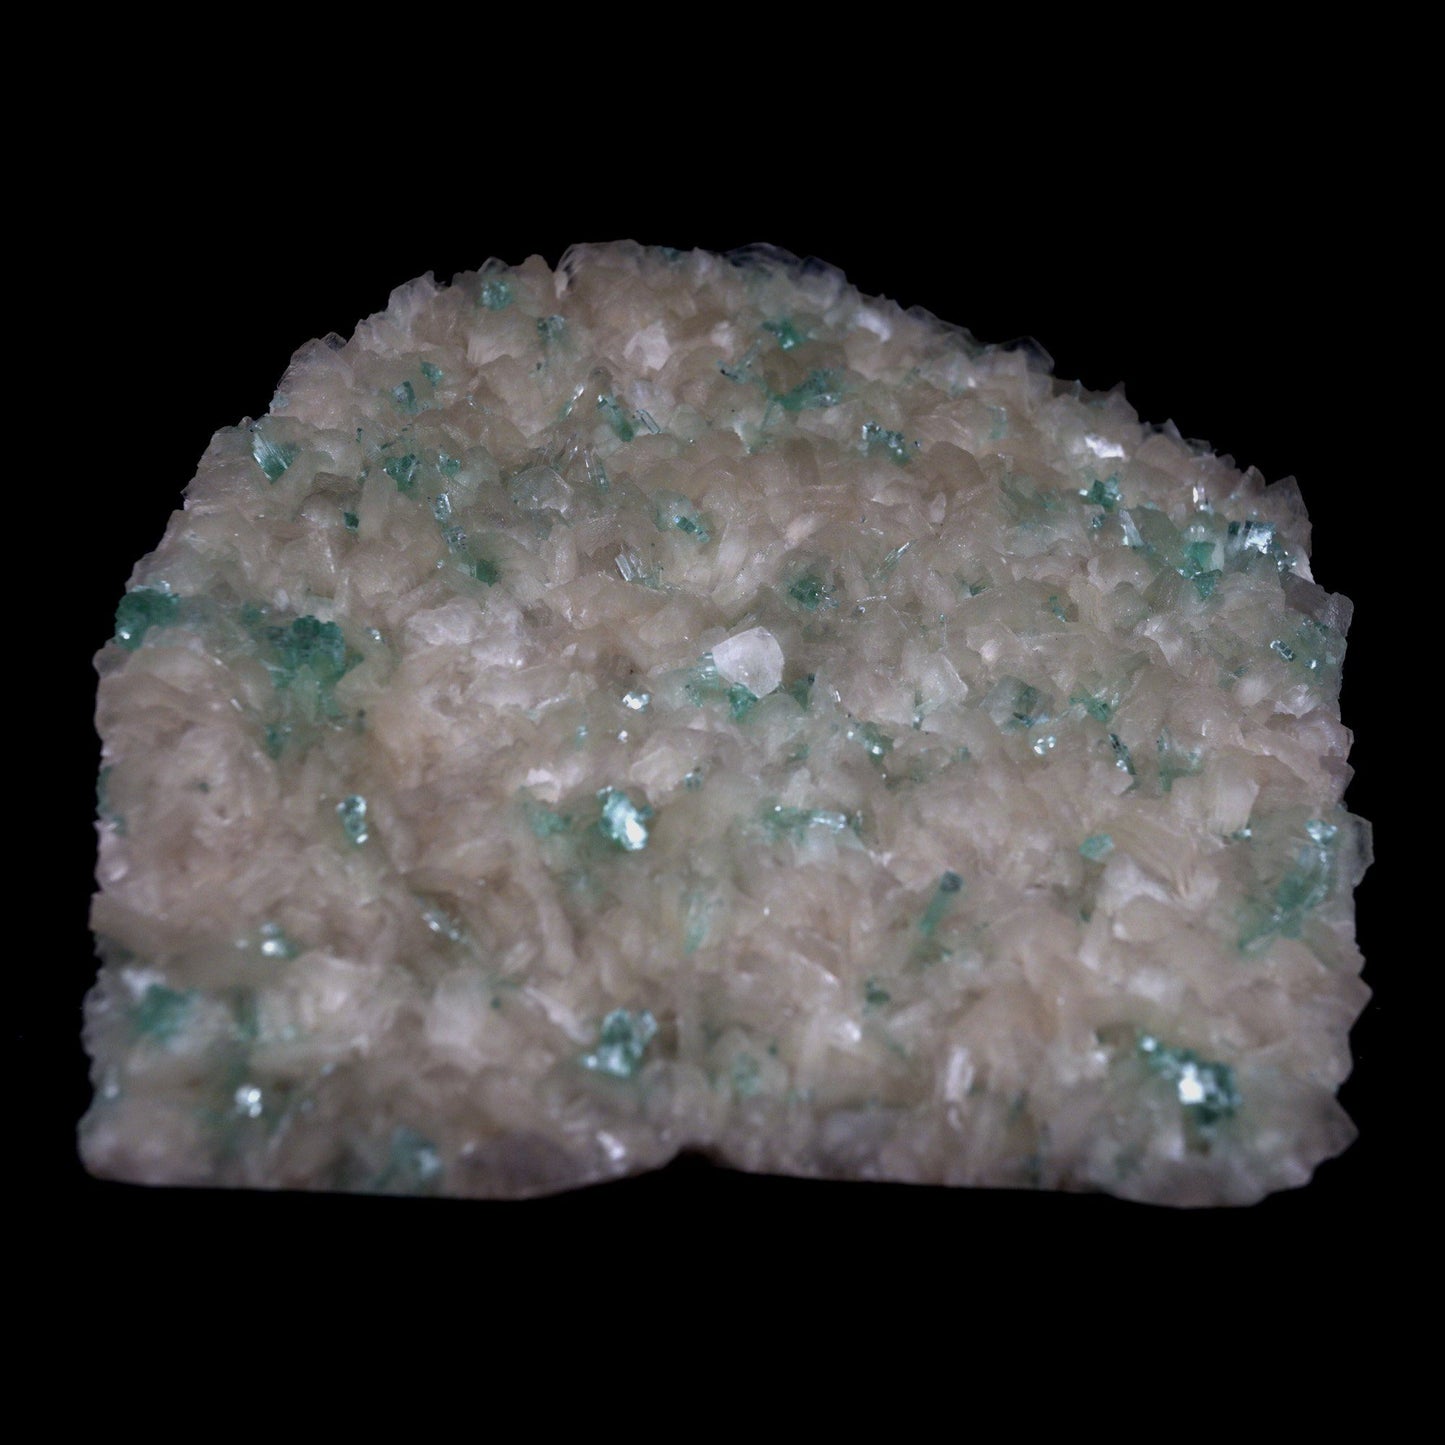 Green Apophyllite with Stilbite, Powellite Rare Find Natural Mineral S…  https://www.superbminerals.us/products/green-apophyllite-sprakling-crystals-with-stilbite-natural-mineral-specimen-b-4767  Features: We have a striking crystal perched elegantly in apophyllite and stilbite crystal nests that are elongated and dramatic! This is a noteworthy specimen in terms of the powellite's own size and the combination's overall appearance. The crystal is a double-terminated, transparent, satiny powellite crystal 